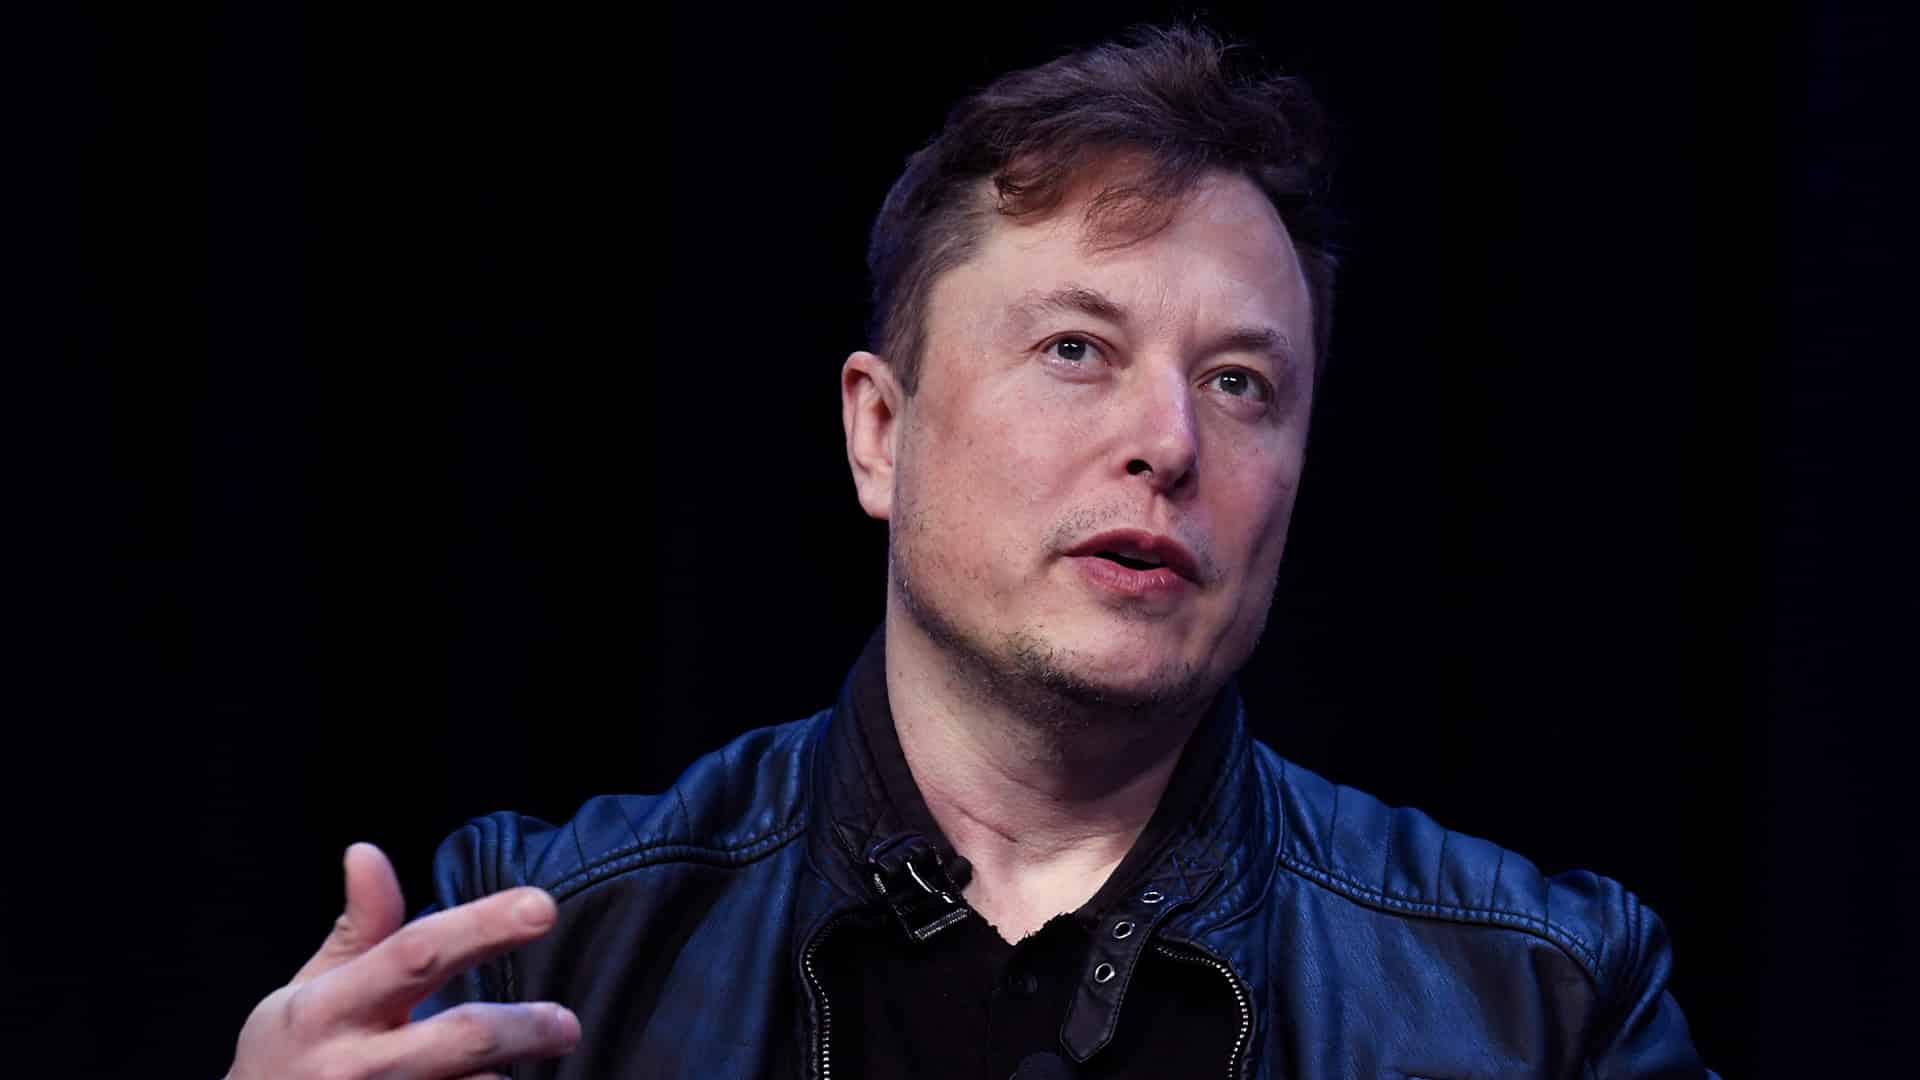 Elon Musk decides not to join Twitter board, says CEO Parag Agrawal